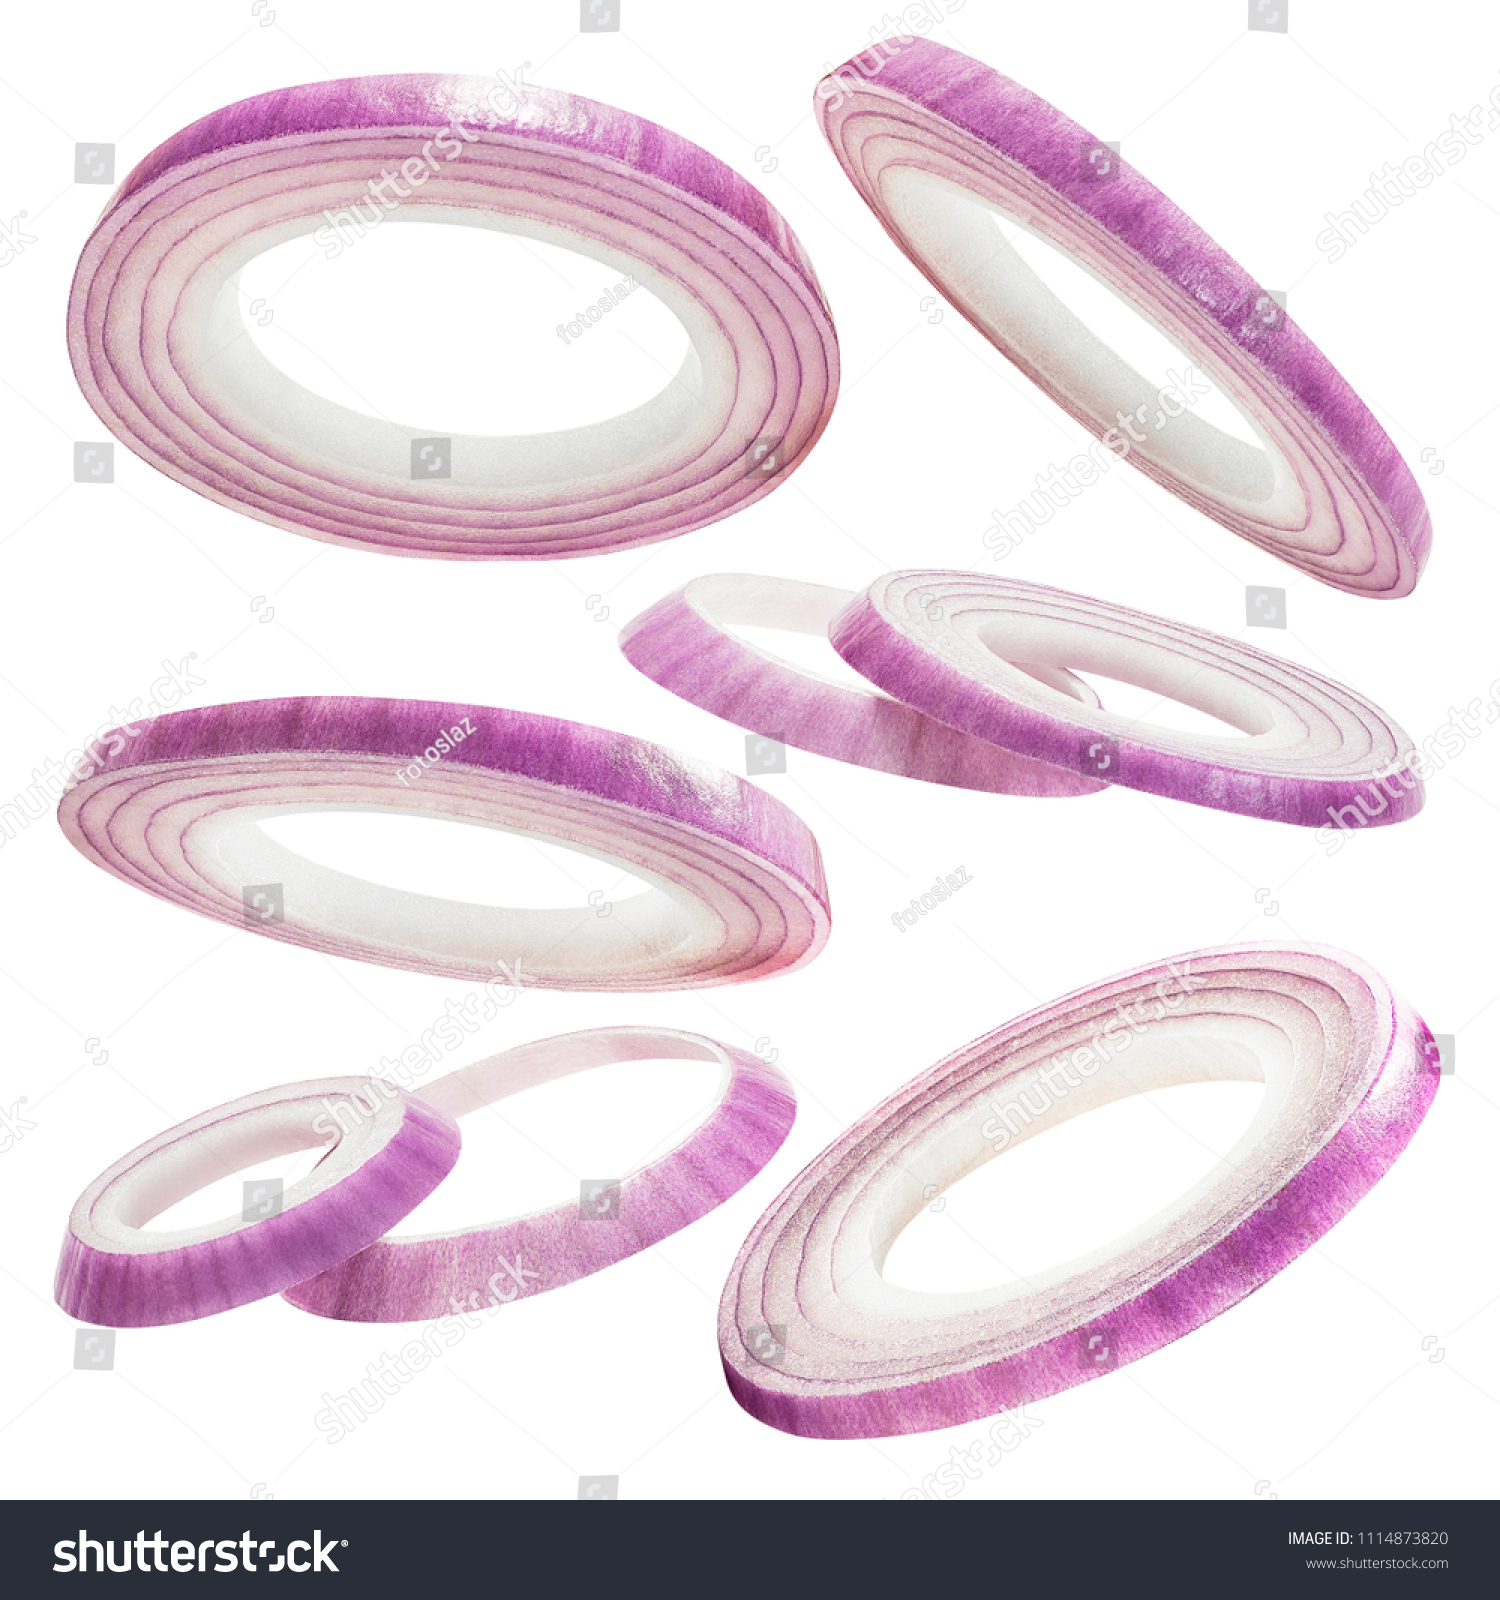 Onion slice for food or burger ingredient isolated on white background with clipping path #1114873820